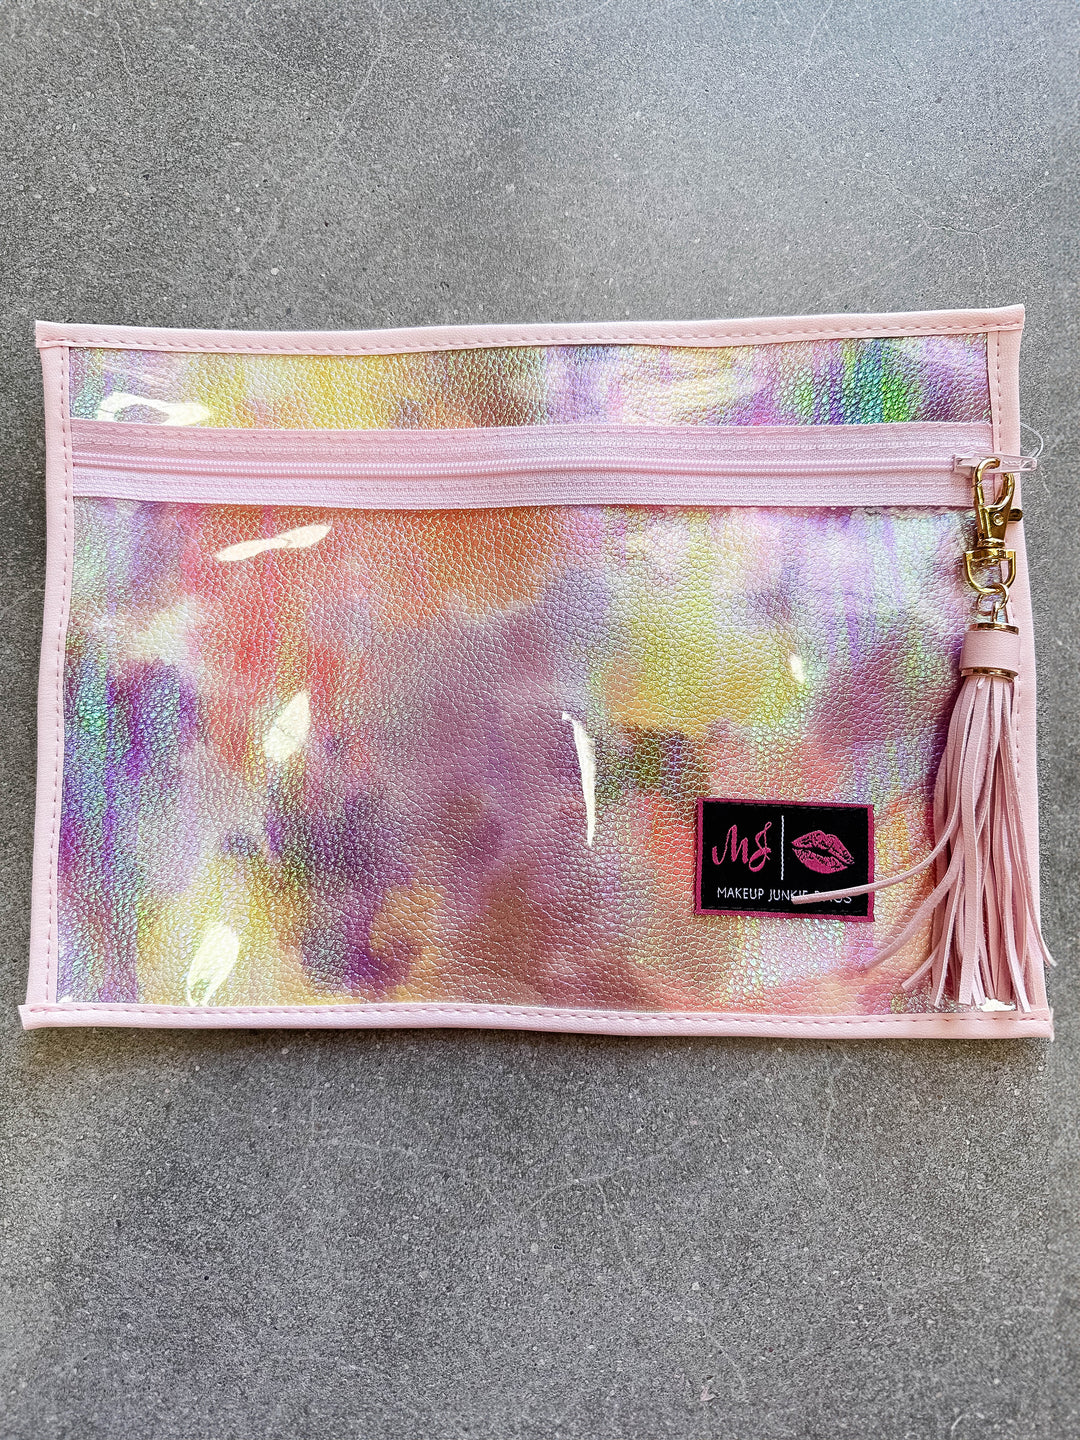 Makeup Junkie Bags - Mermaid Shimmer In the Clear Supplies Pouch [Pre Order]